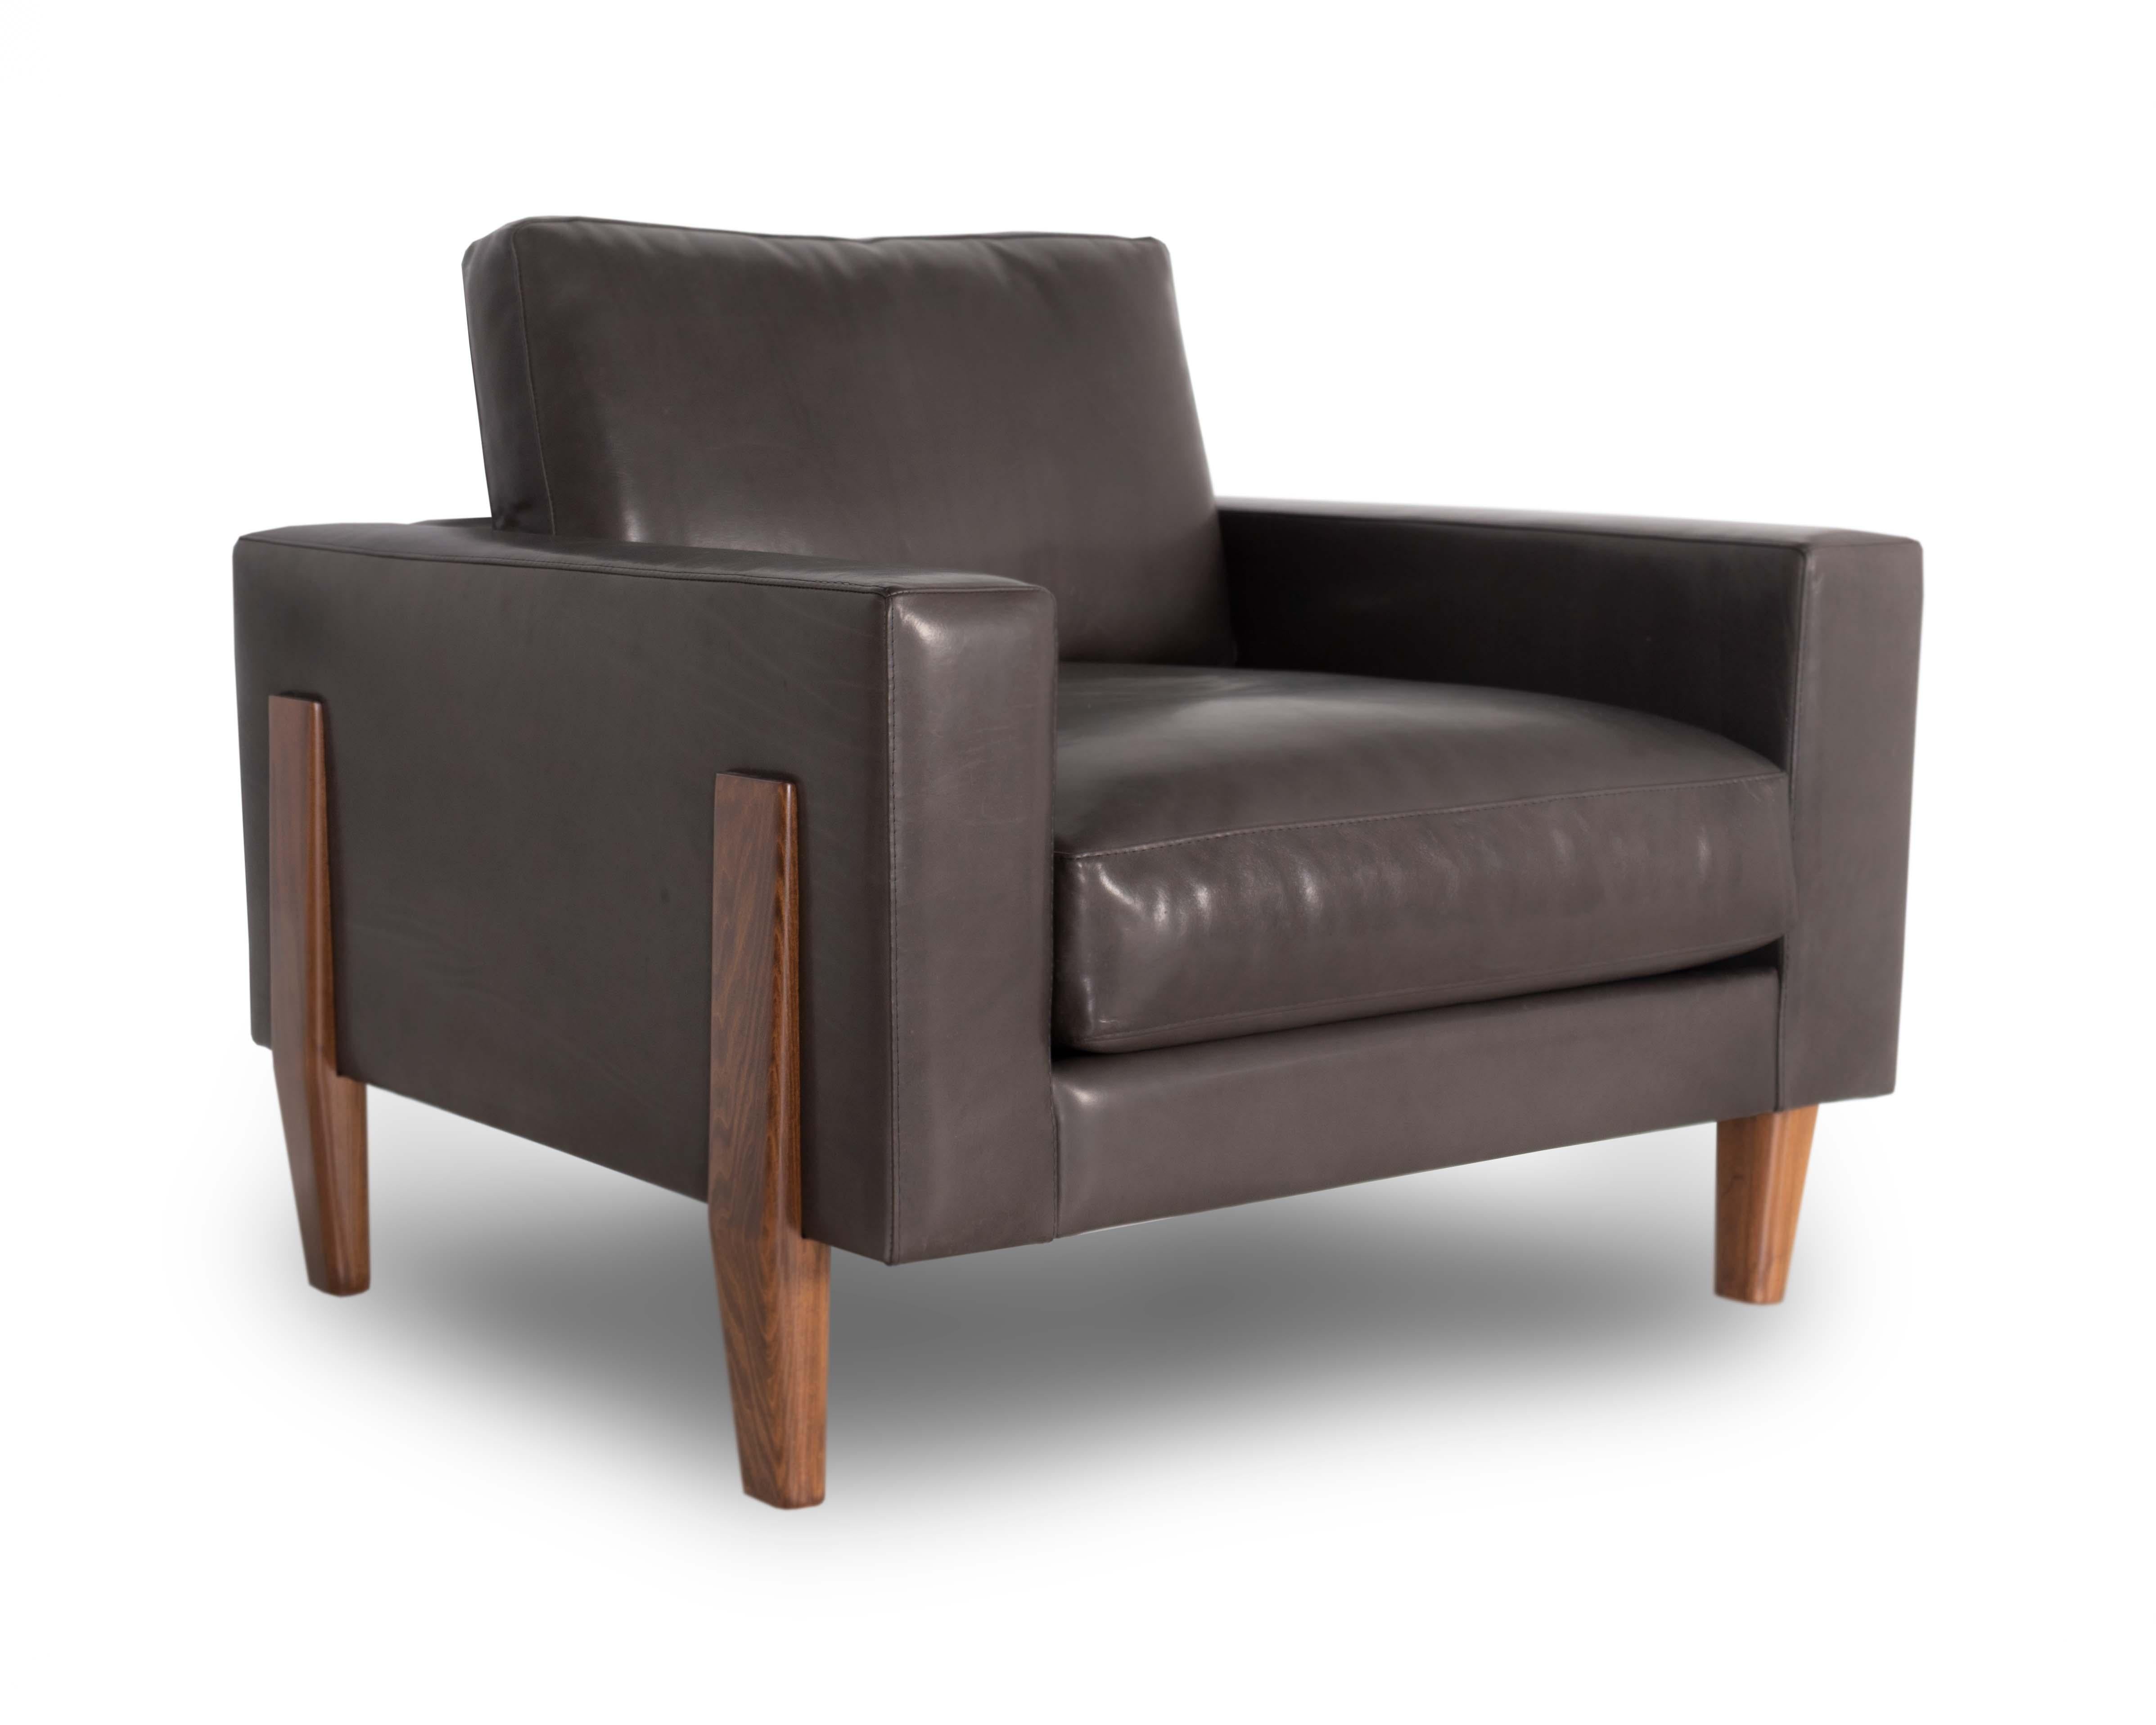 The Alpine high leg chair and sectional take inspiration from inspirational architecturally constructed wooden structures of Texas. The Alpine leg has contouring angles that start at the base, grow up, and taper nicely into the outside, finishing